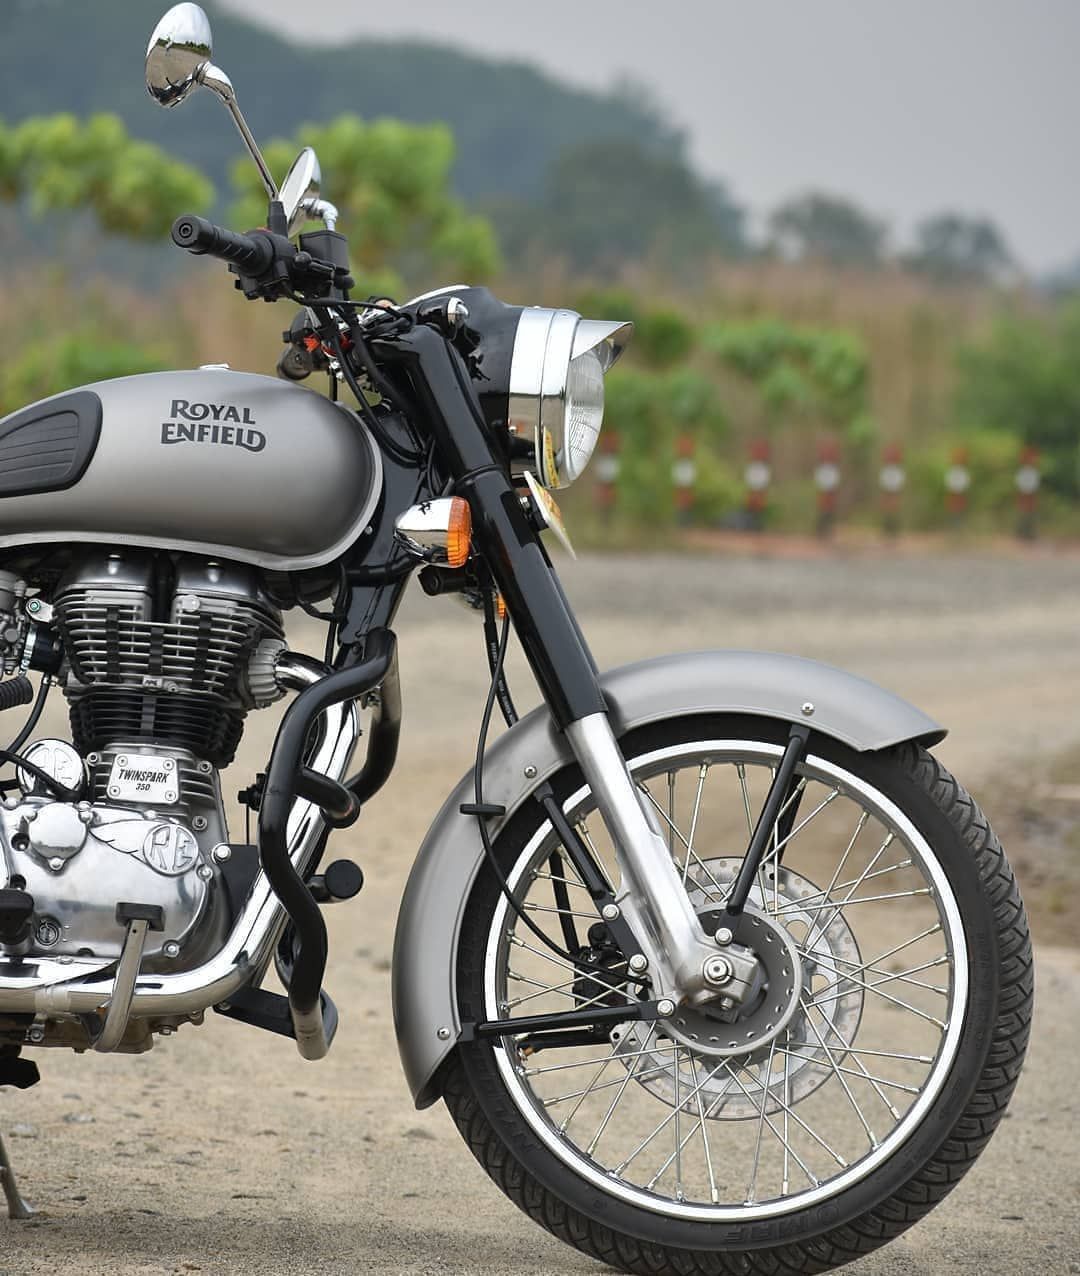 For more amazing posts of Royal Enfield follow this board. Royal enfield HD wallpaper, Royal enfield, Royal enfield wallpaper